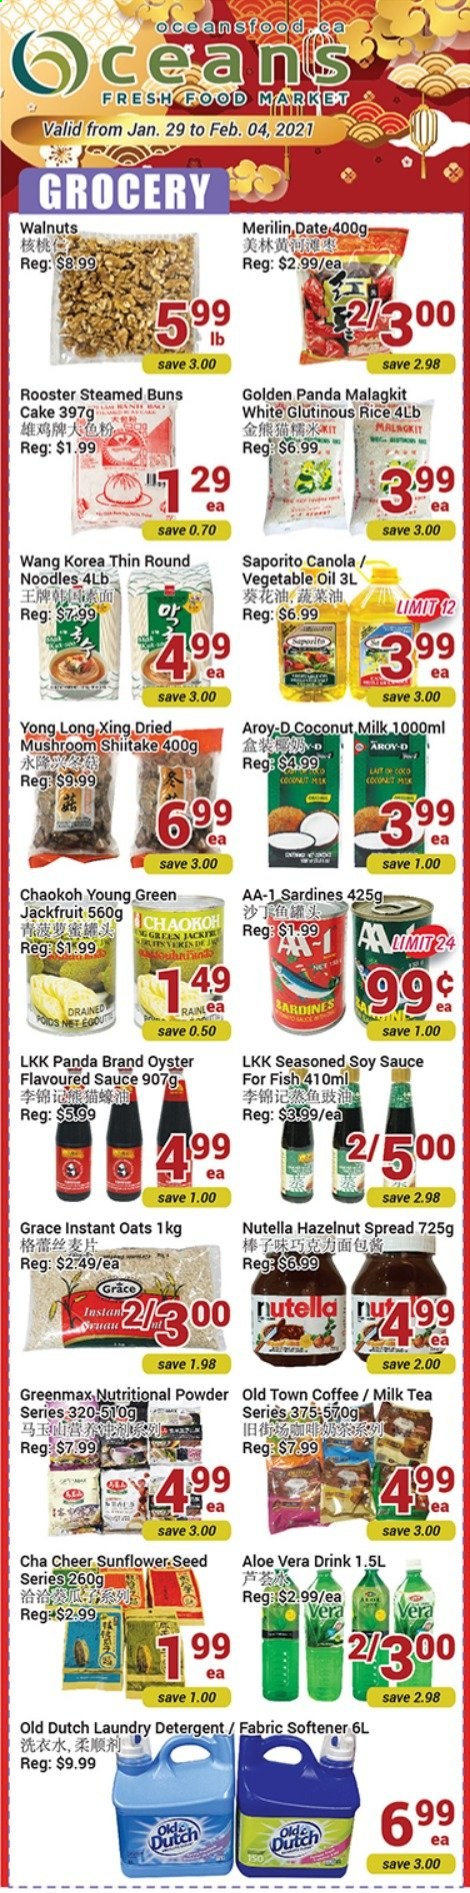 thumbnail - Oceans Flyer - January 29, 2021 - February 04, 2021 - Sales products - mushrooms, cake, buns, sardines, oysters, fish, noodles, oats, coconut milk, rice, soy sauce, vegetable oil, oil, hazelnut spread, walnuts, tea, coffee, fabric softener, laundry detergent, Nutella. Page 1.